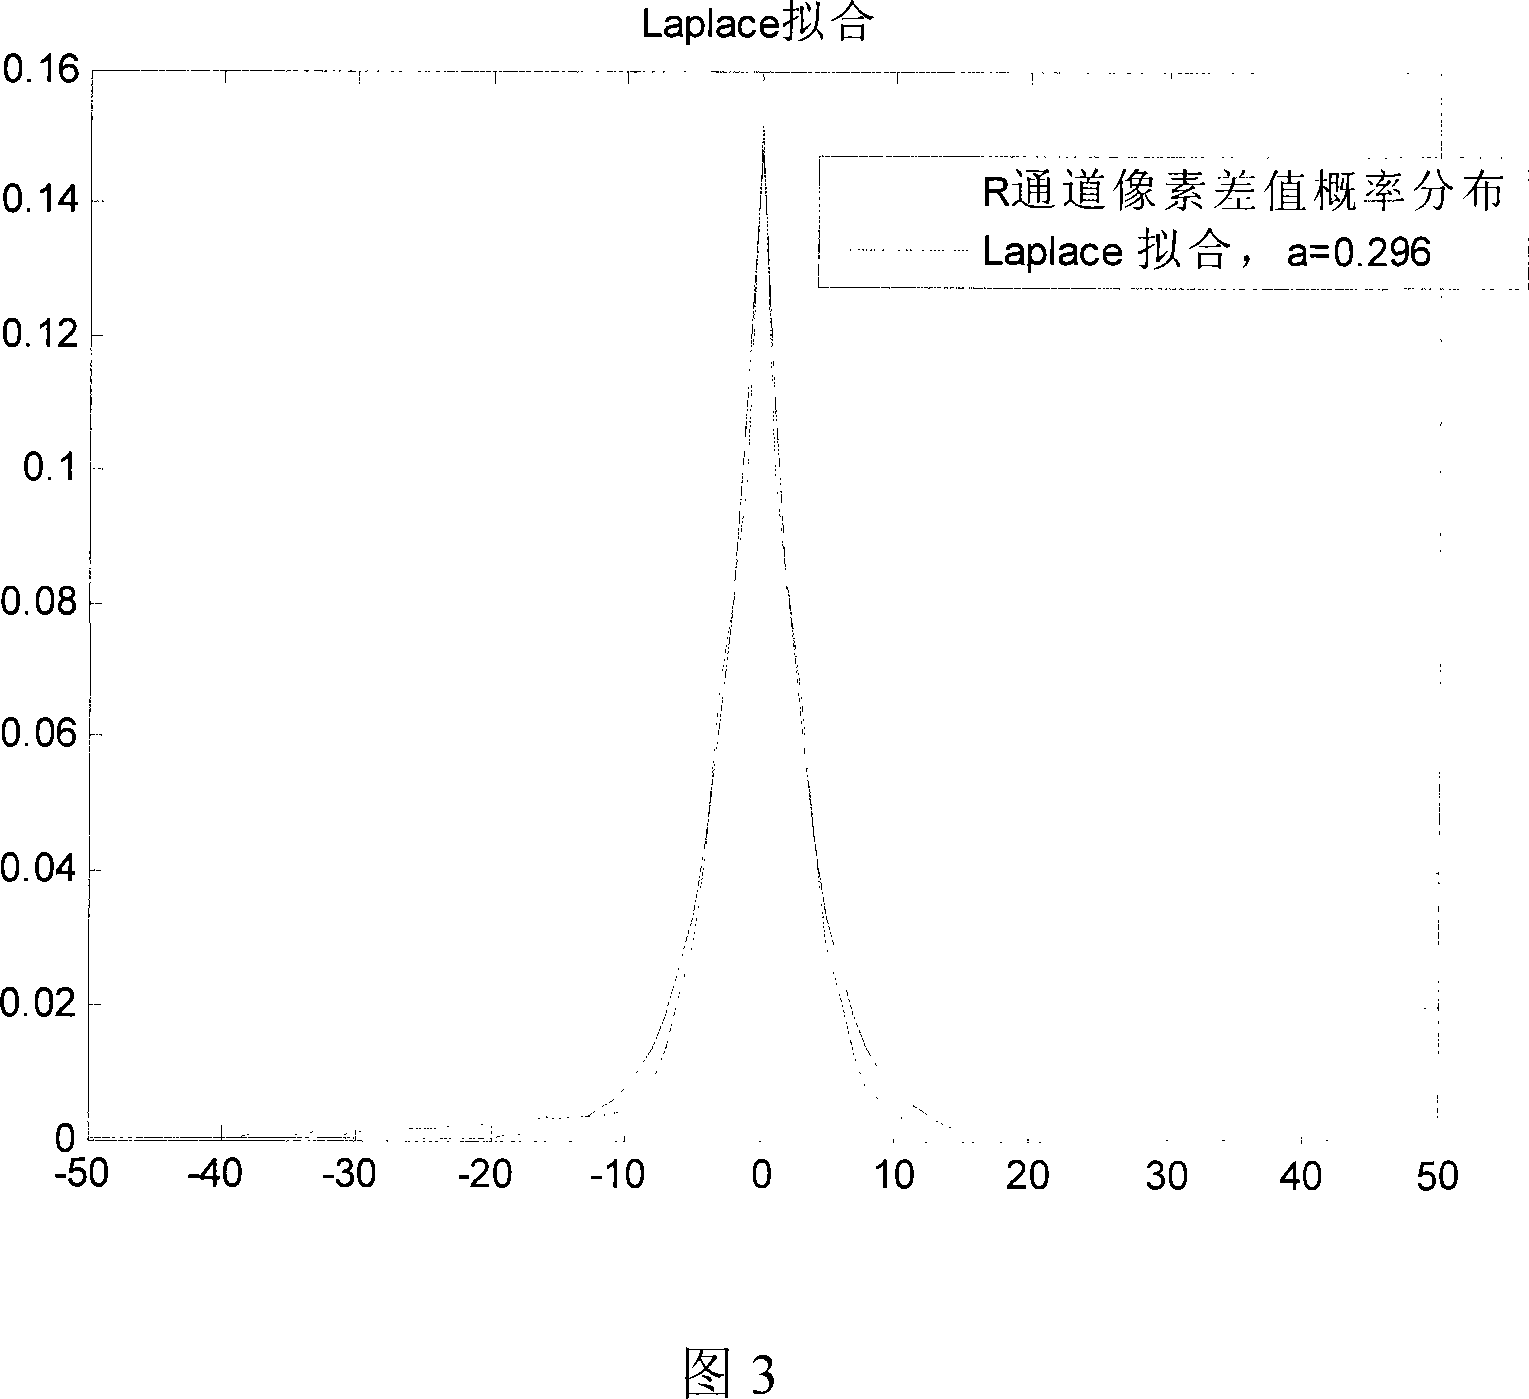 Digital image evidence collecting method for detecting the multiple tampering based on the tone mode